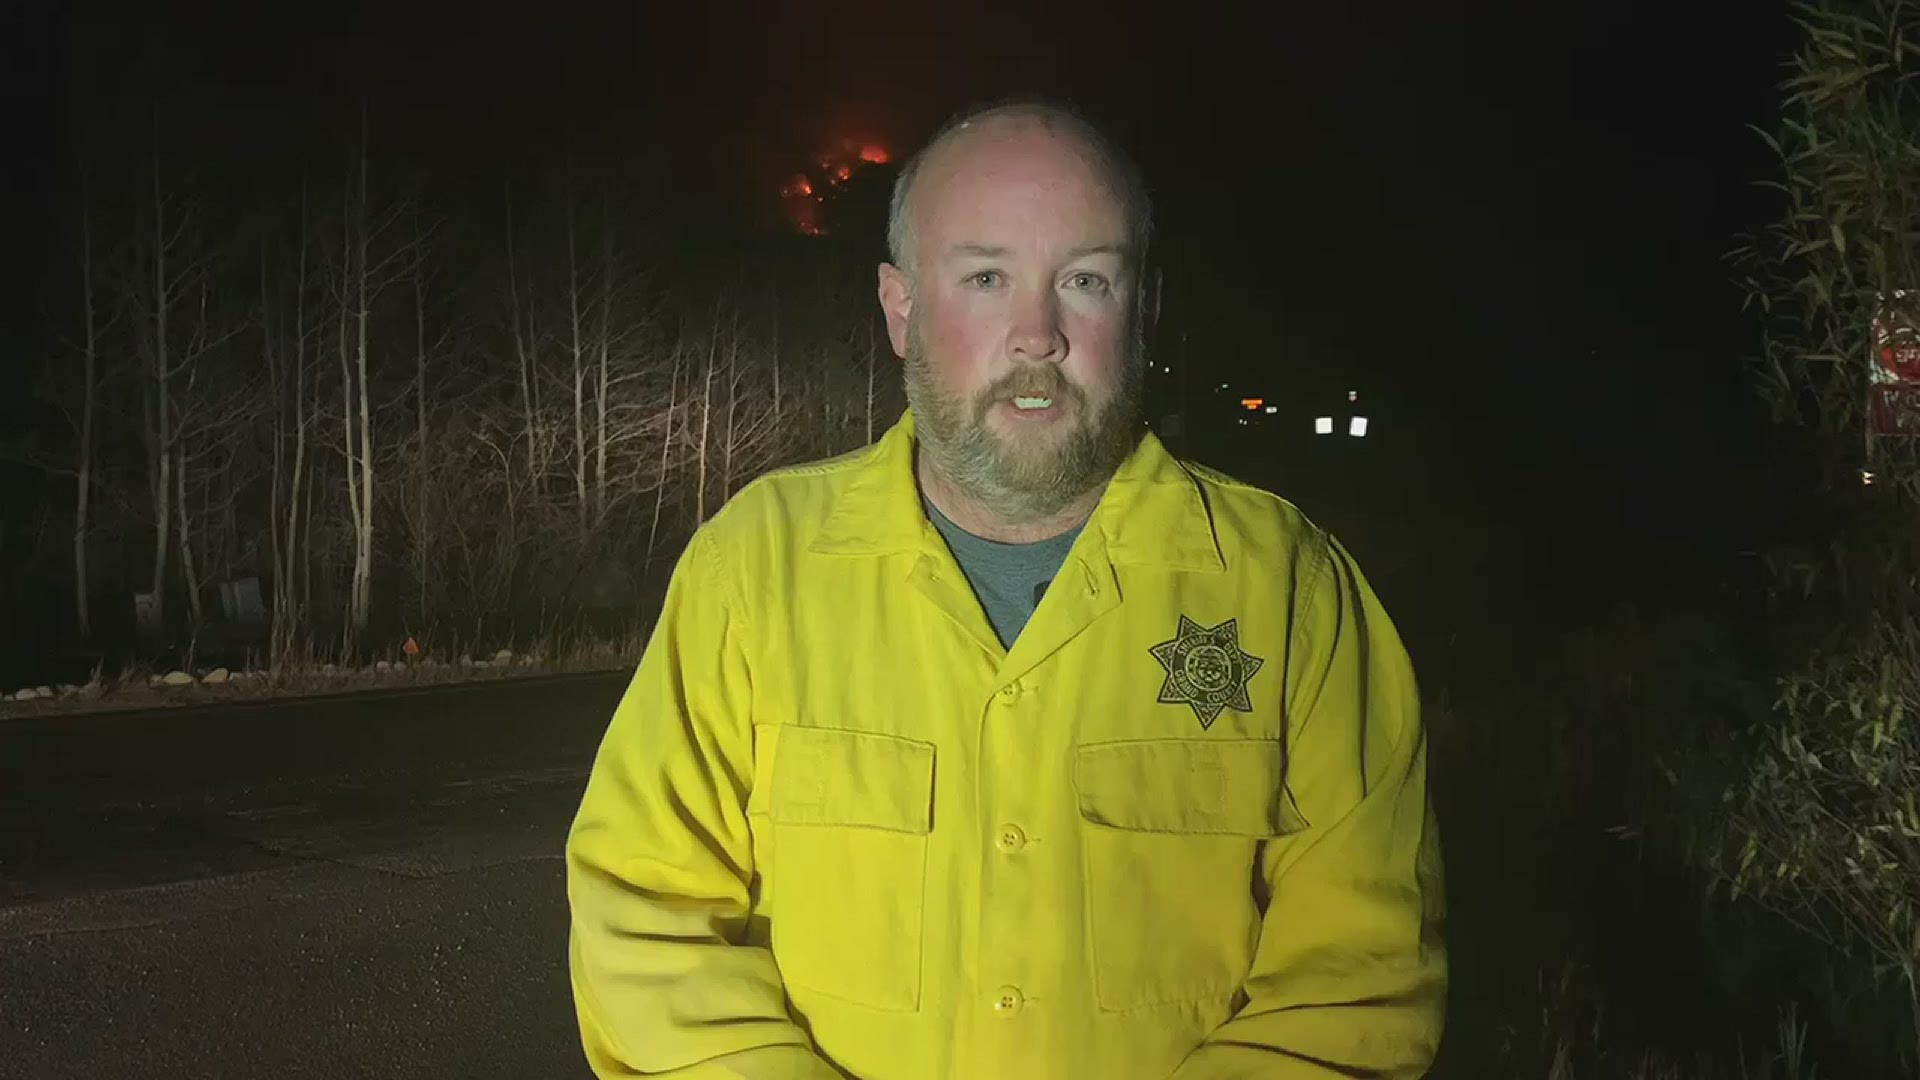 Grand County Sheriff Brett Schroetlin provides an update on the East Troublesome Fire, which burned aggressively overnight and into Thursday morning.